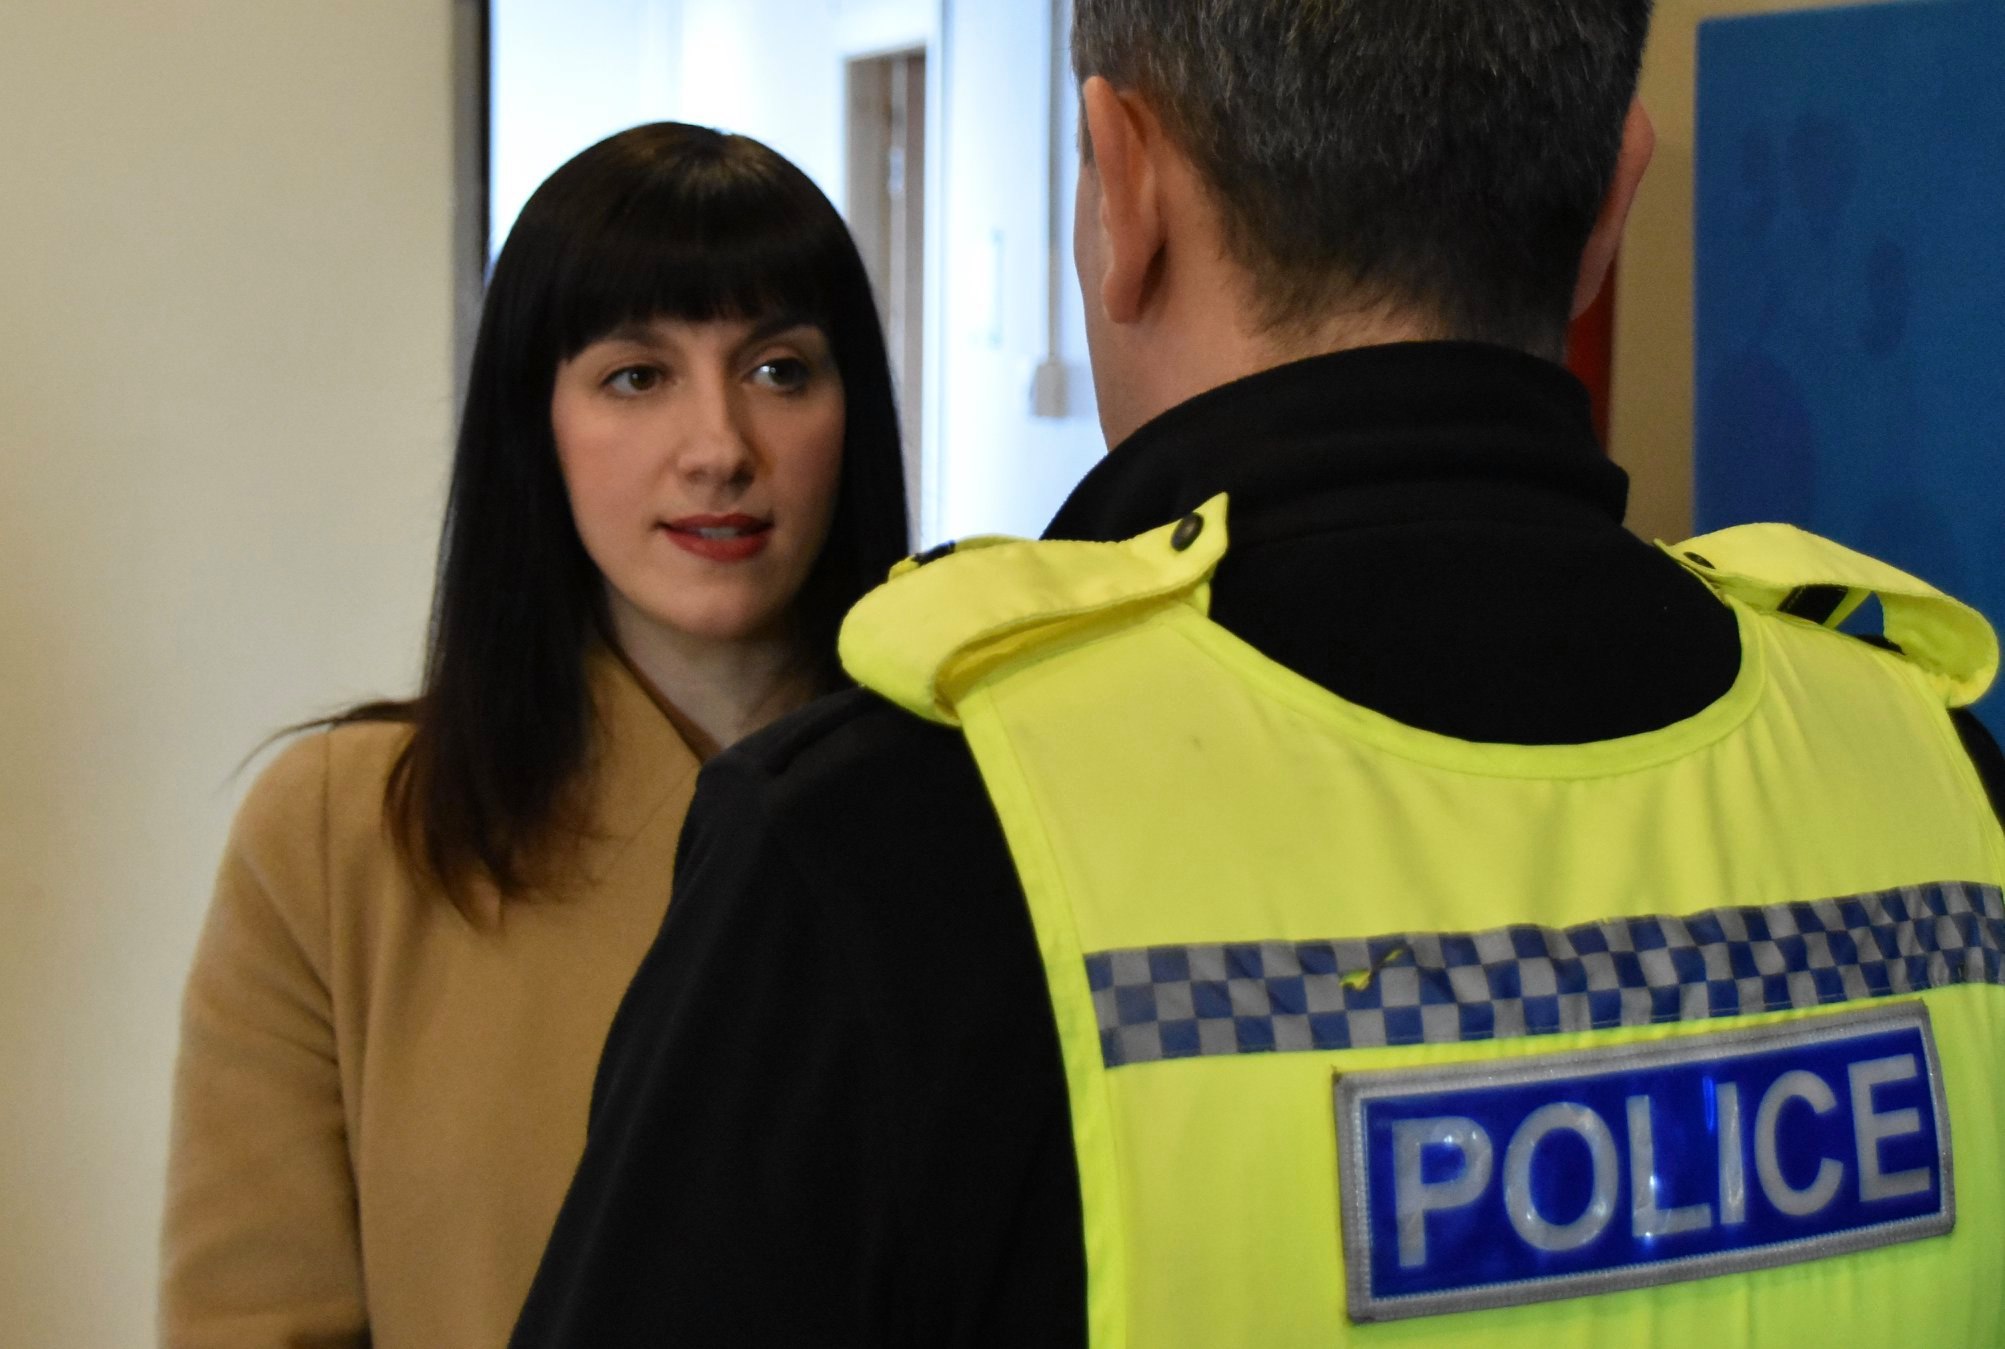 Bridget Phillipson MP provides update on policing during COVID-19 outbreak